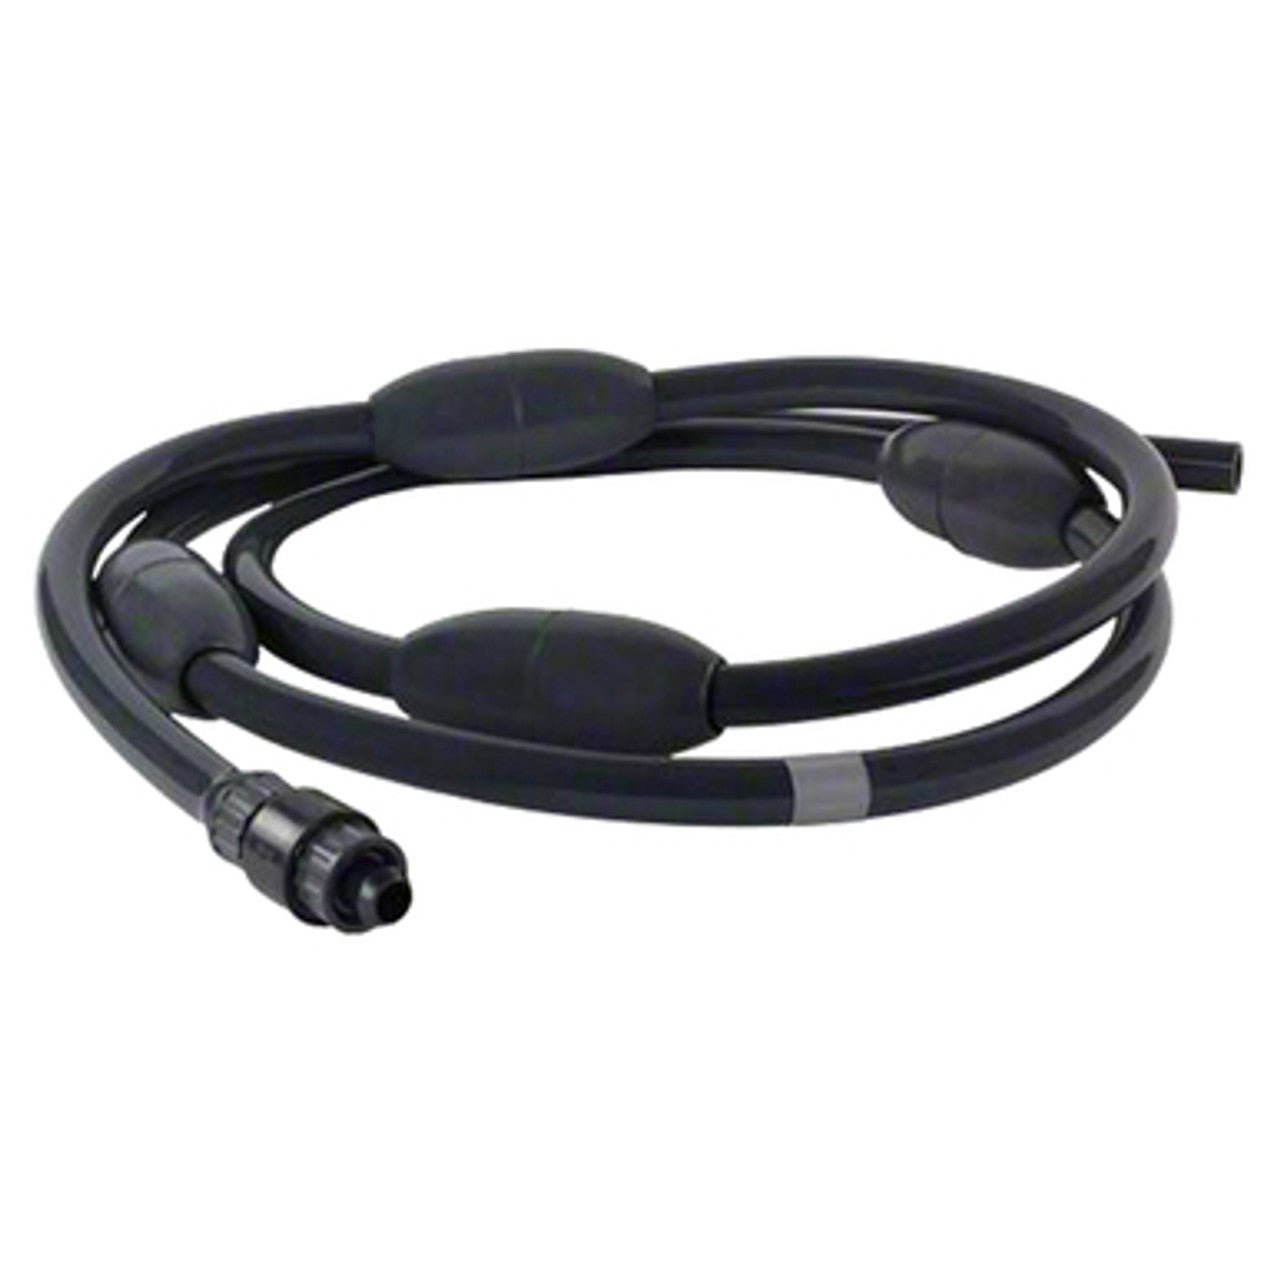 Pentair 10' Hard Feed Line Hose Kit for Racer Pressure Side Cleaner 360266 - Cleaner Parts - img-2